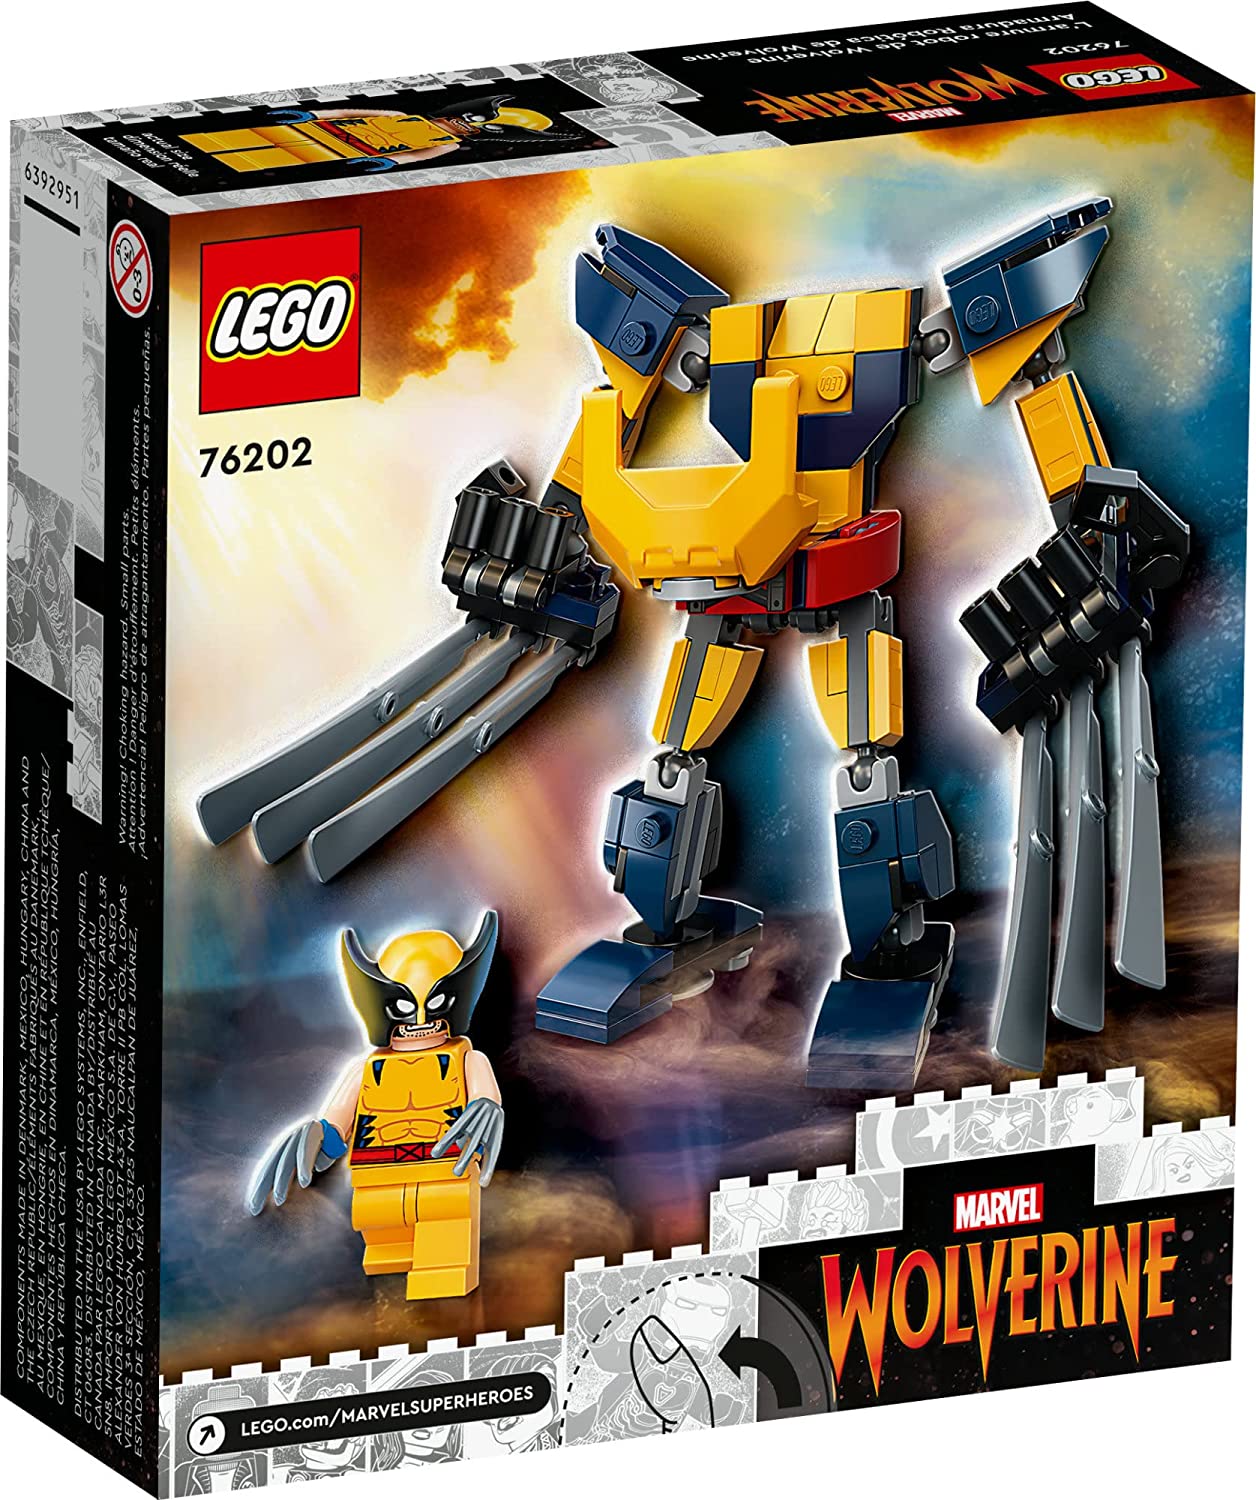 LEGO Marvel Wolverine Mech Armor 76202 Building Kit; Collectible Mech and Minifigure for Wolverine Fans Aged 7+ (141 Pieces)